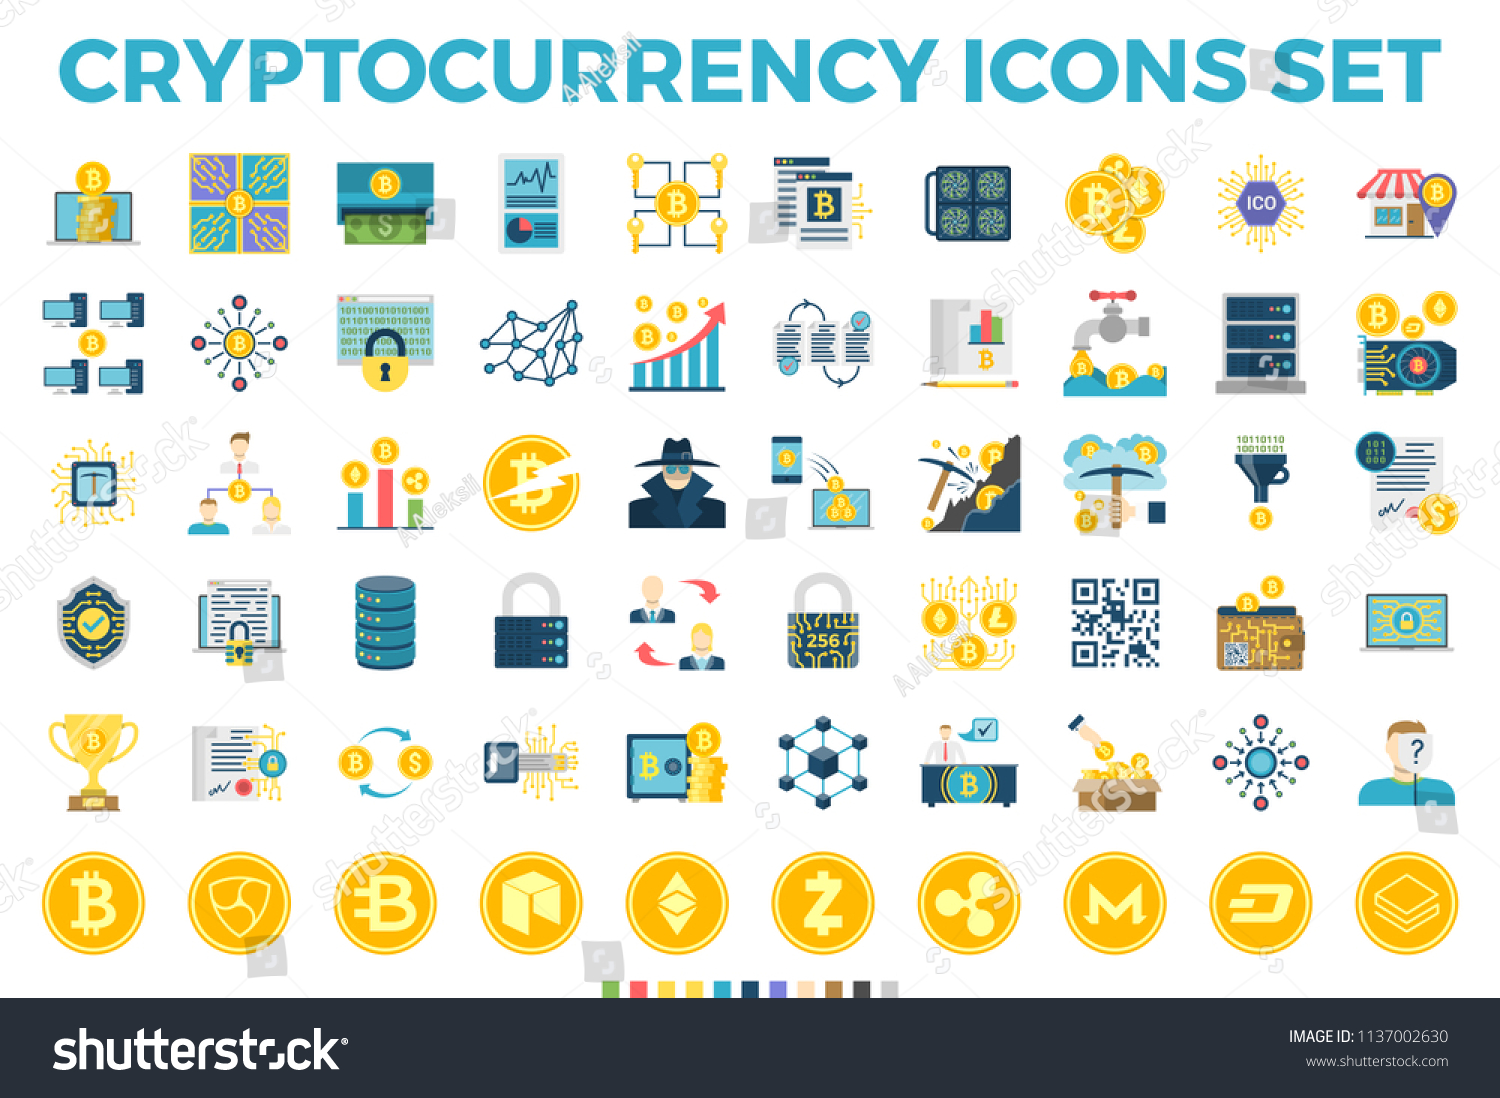 SVG of Cryptocurrency and Blockchain Related Flat Icons. Crypto Icon Set Featuring Bitcoin, Wallet, Mining, Distributed Ledger Technology, P2P, Altcoins, Encryption, Smart Contracts, Decentralized Vectors svg